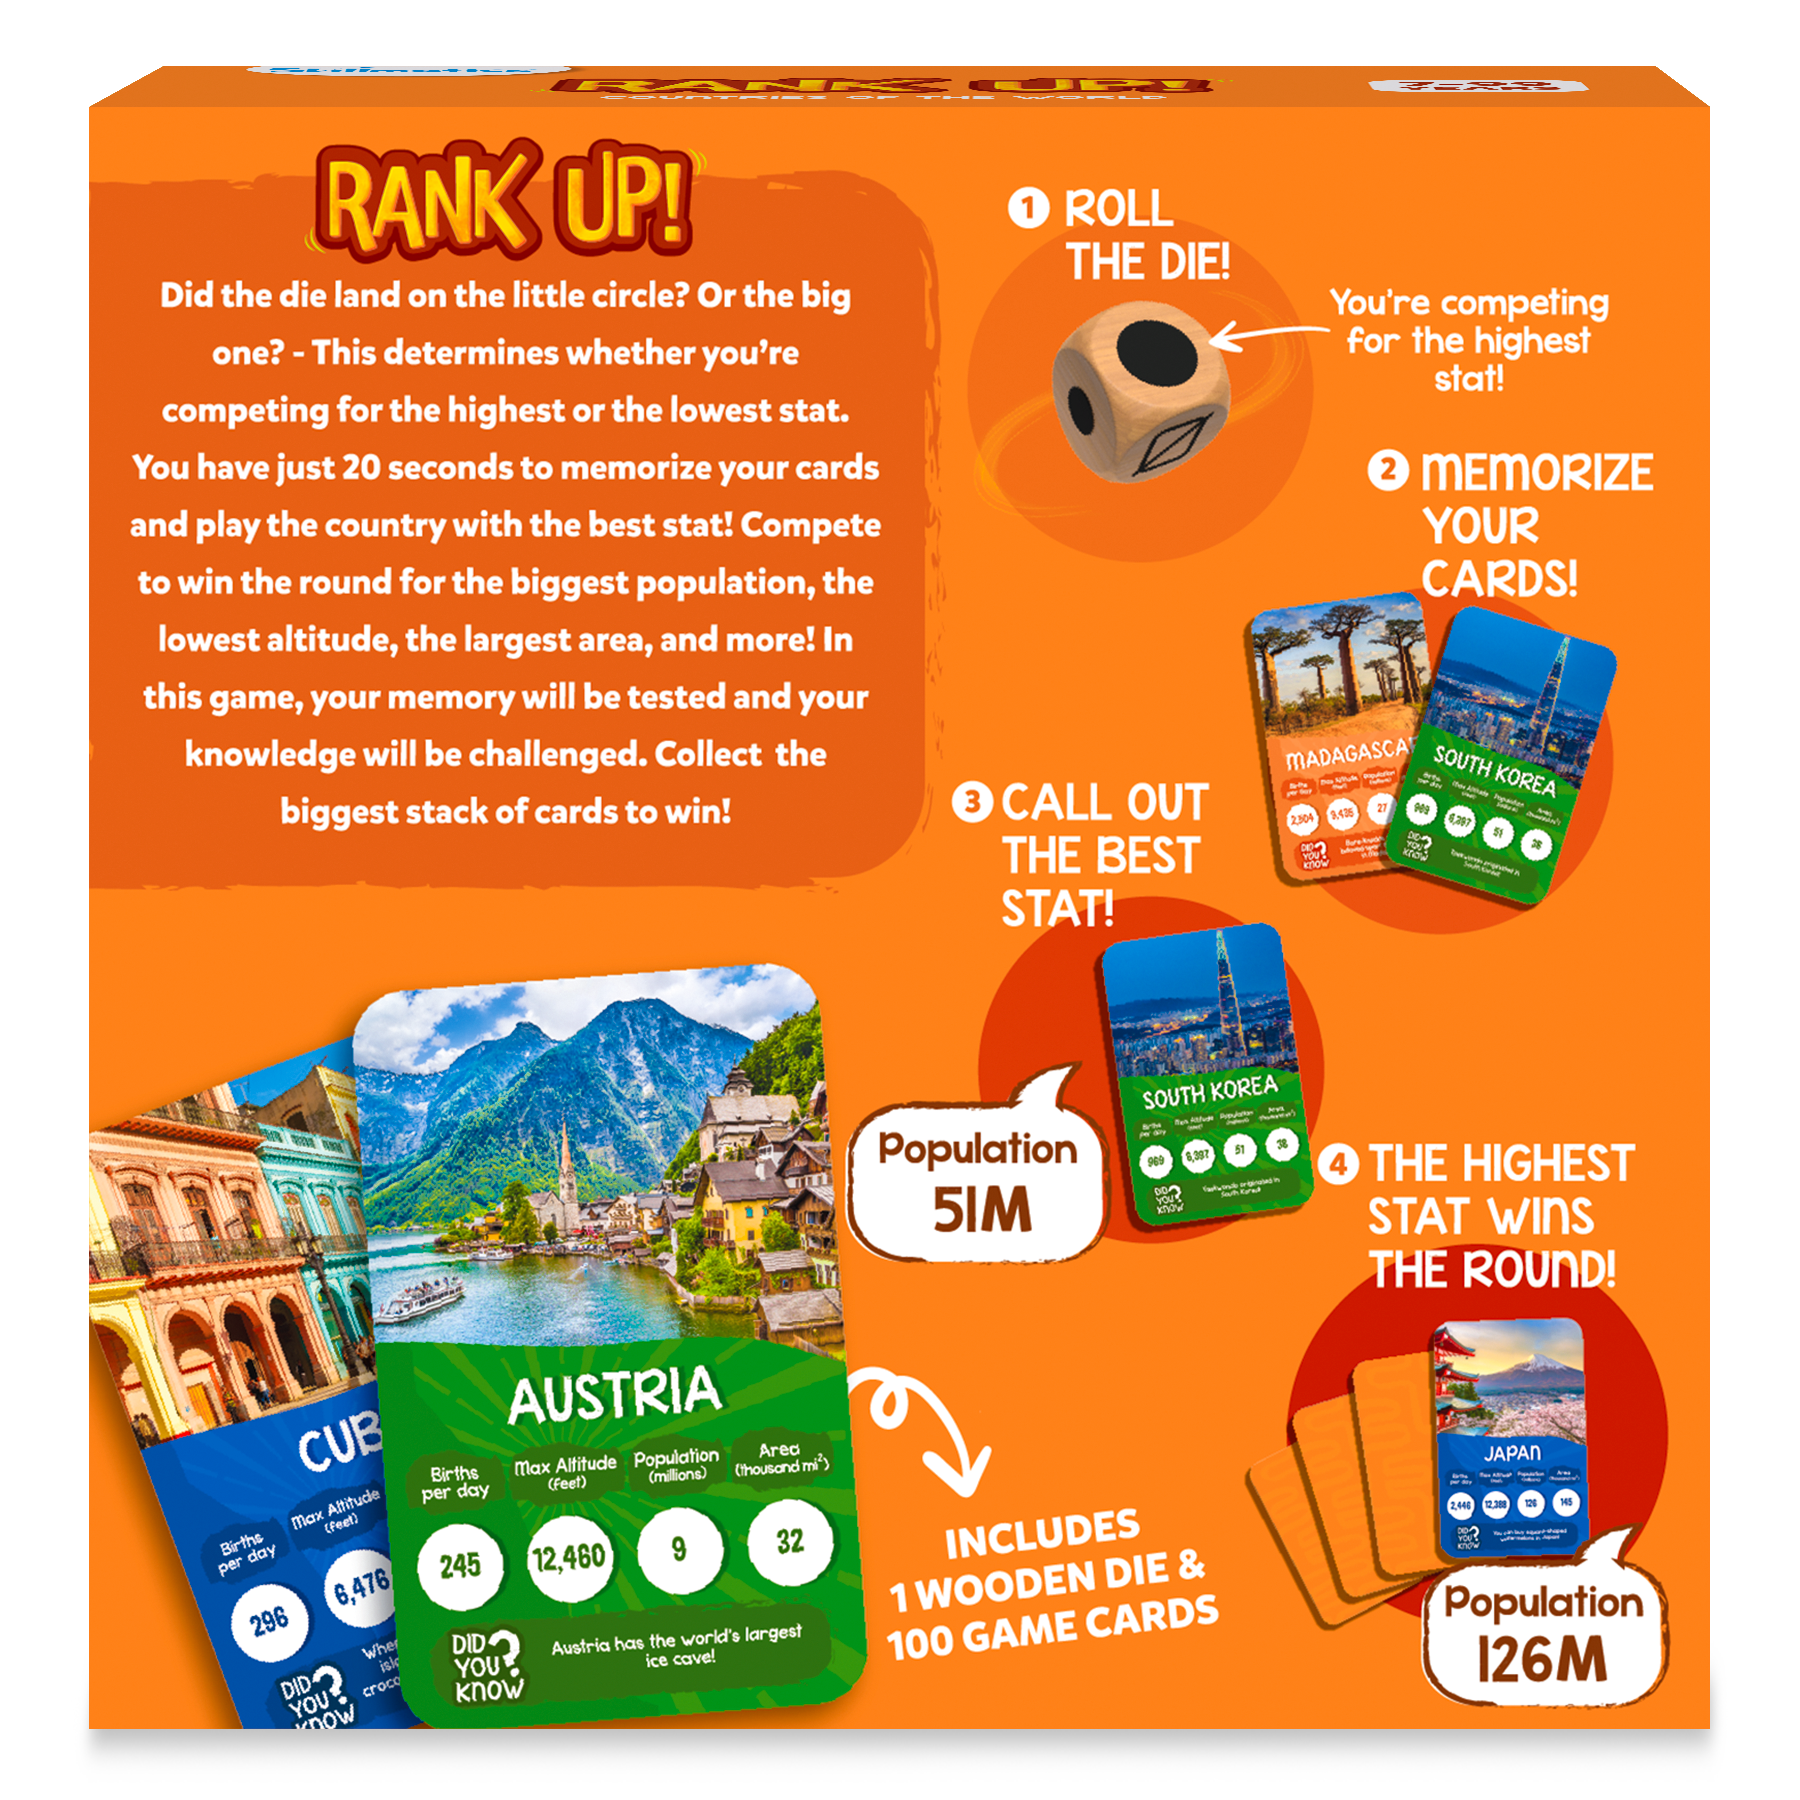 Skillmatics Trump Card Game - Rank Up Countries Of The World, Fun & Fast-Paced Game Of Memory, Perfect For Family Game Night, Gifts For Ages 7 And Up